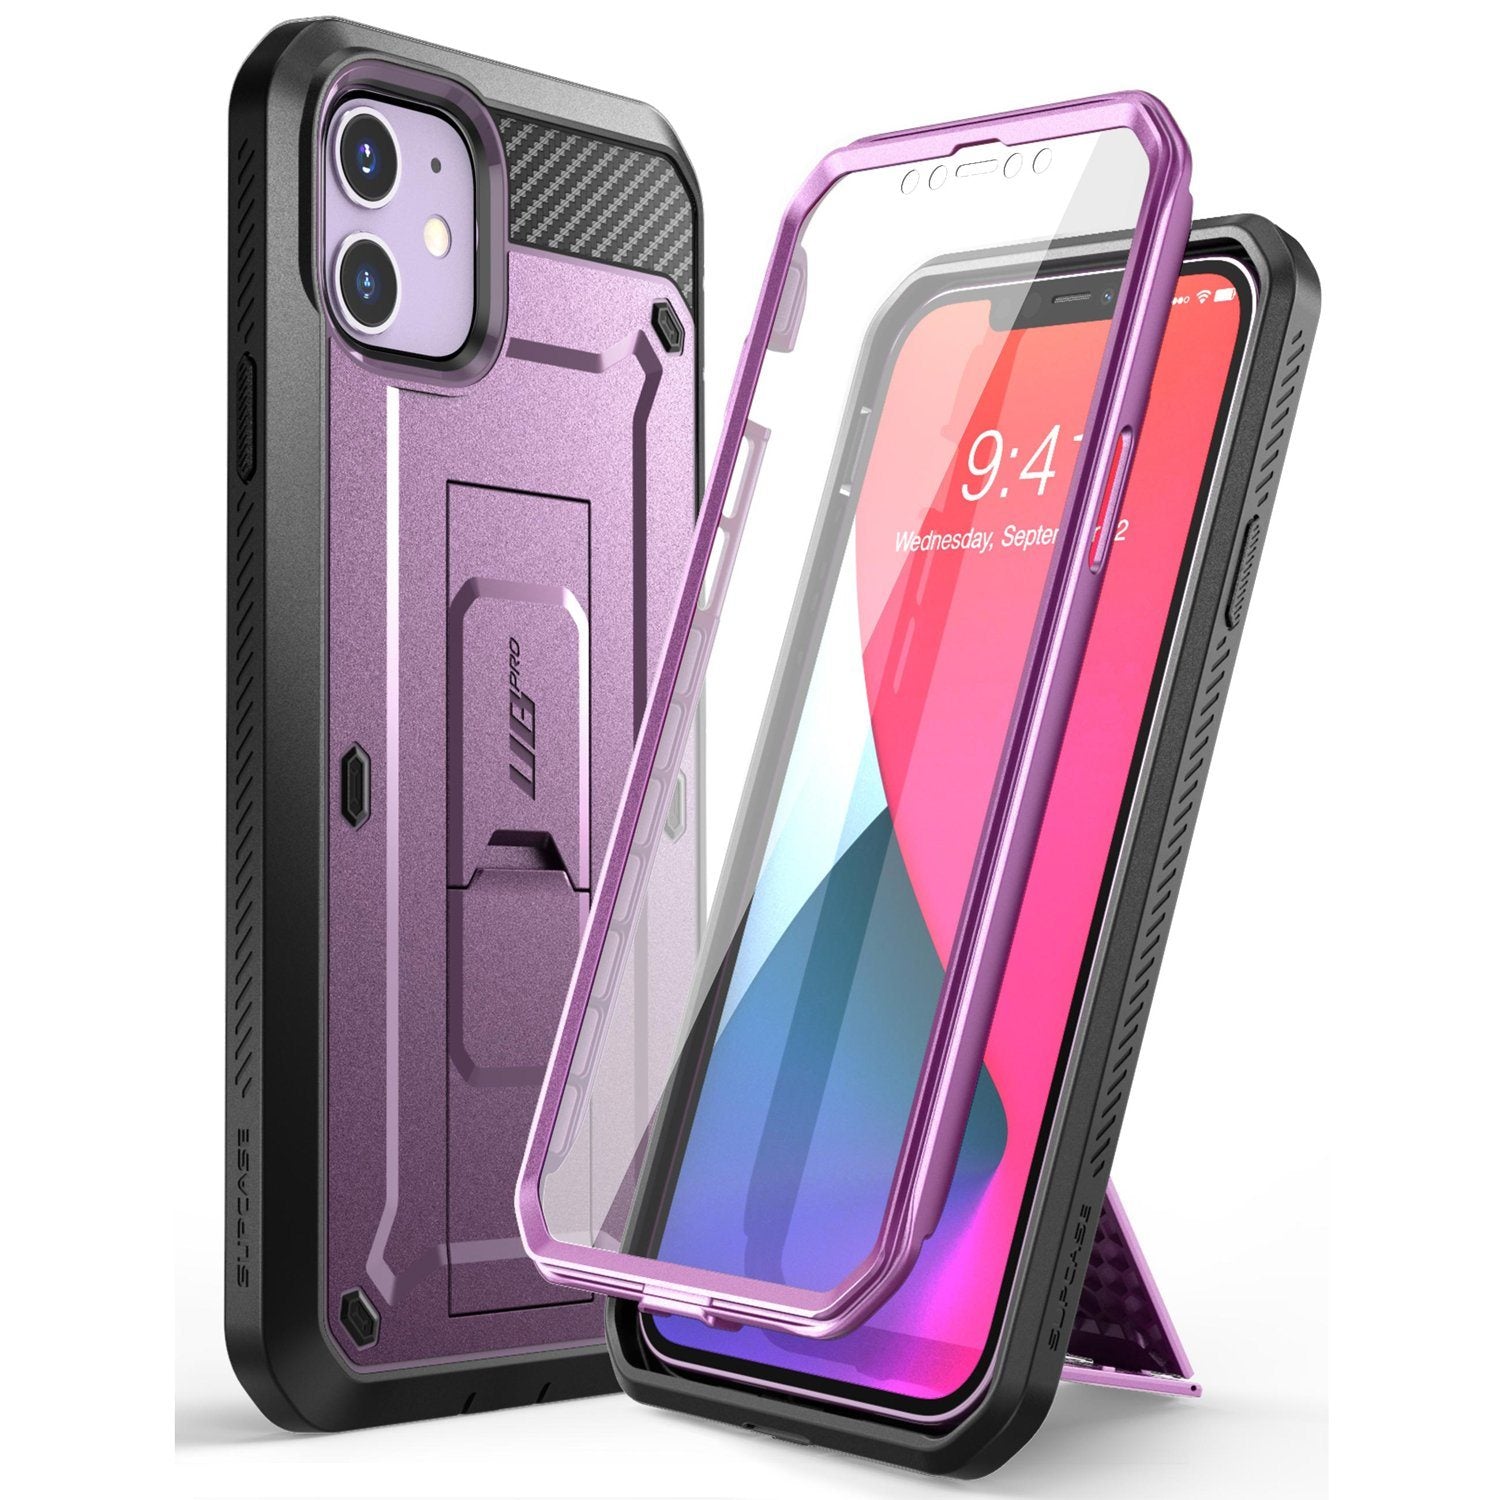 Supcase Unicorn Beetle Pro Series Full-Body Rugged Holster Case for iPhone 12 mini 5.4"(2020)(With Build-in Screen Protector)